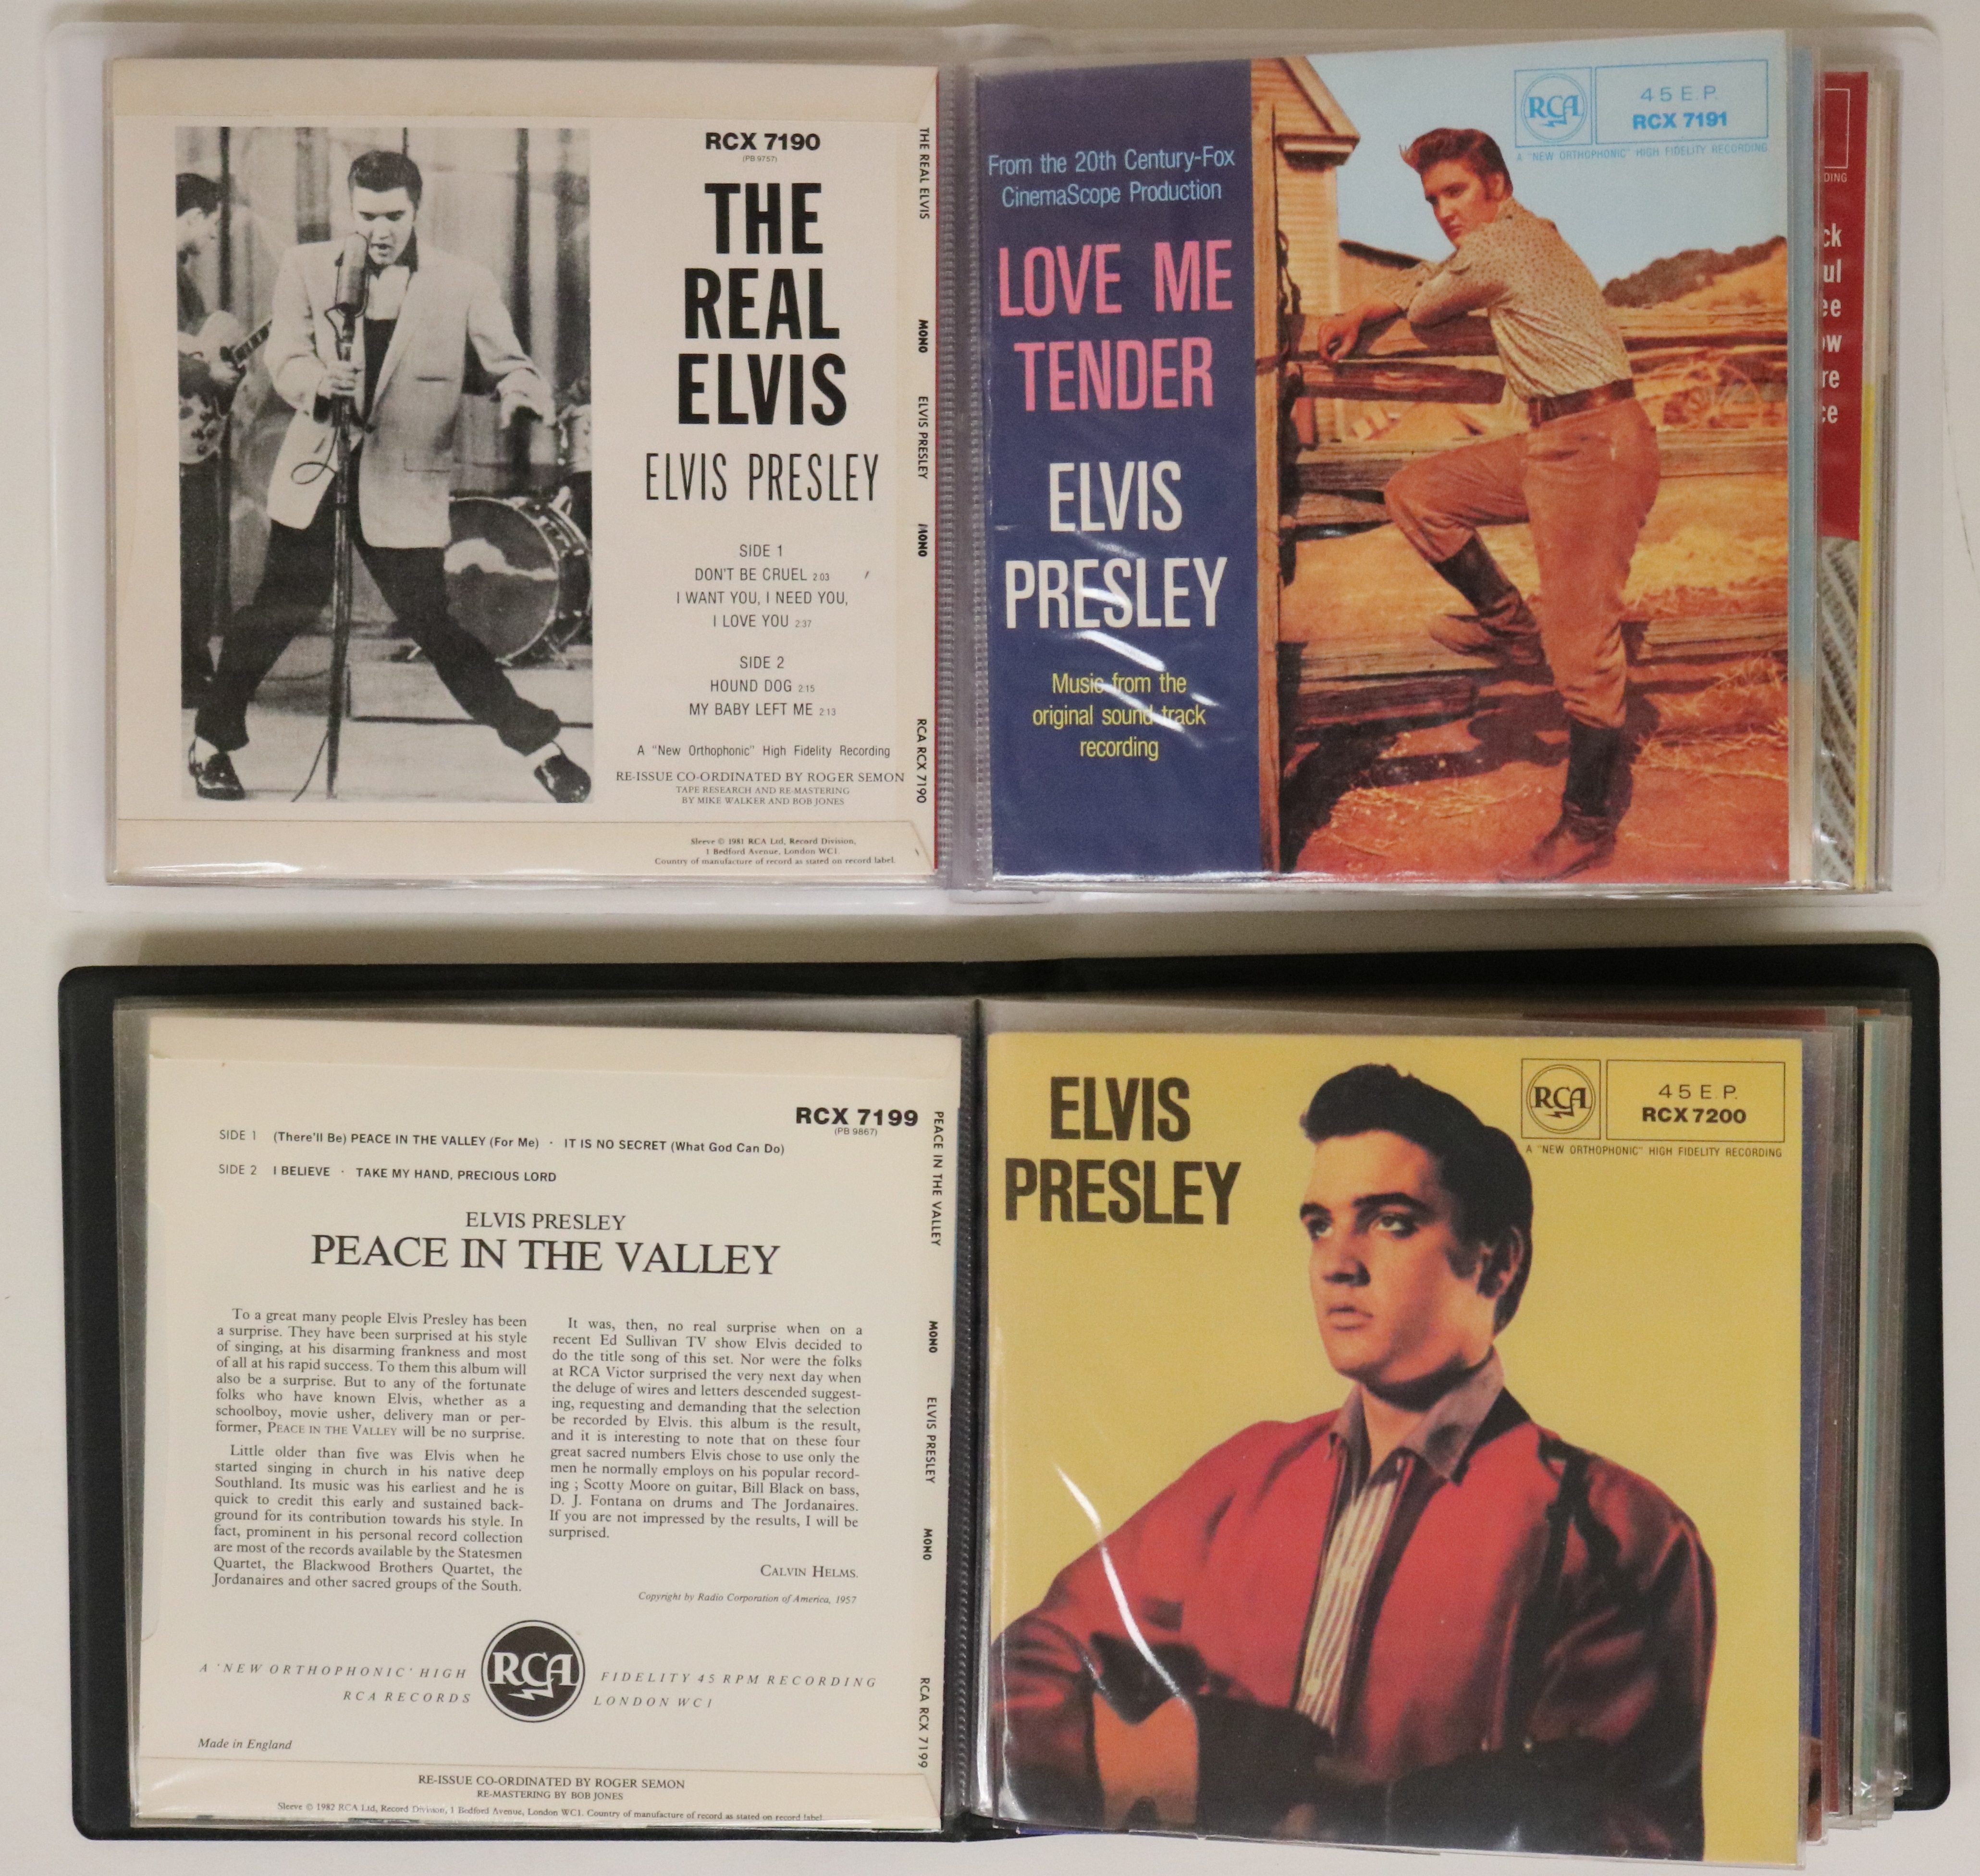 ELVIS PRESLEY - THE E.P. COLLECTION ALBUMS - BOX SETS. - Image 4 of 5